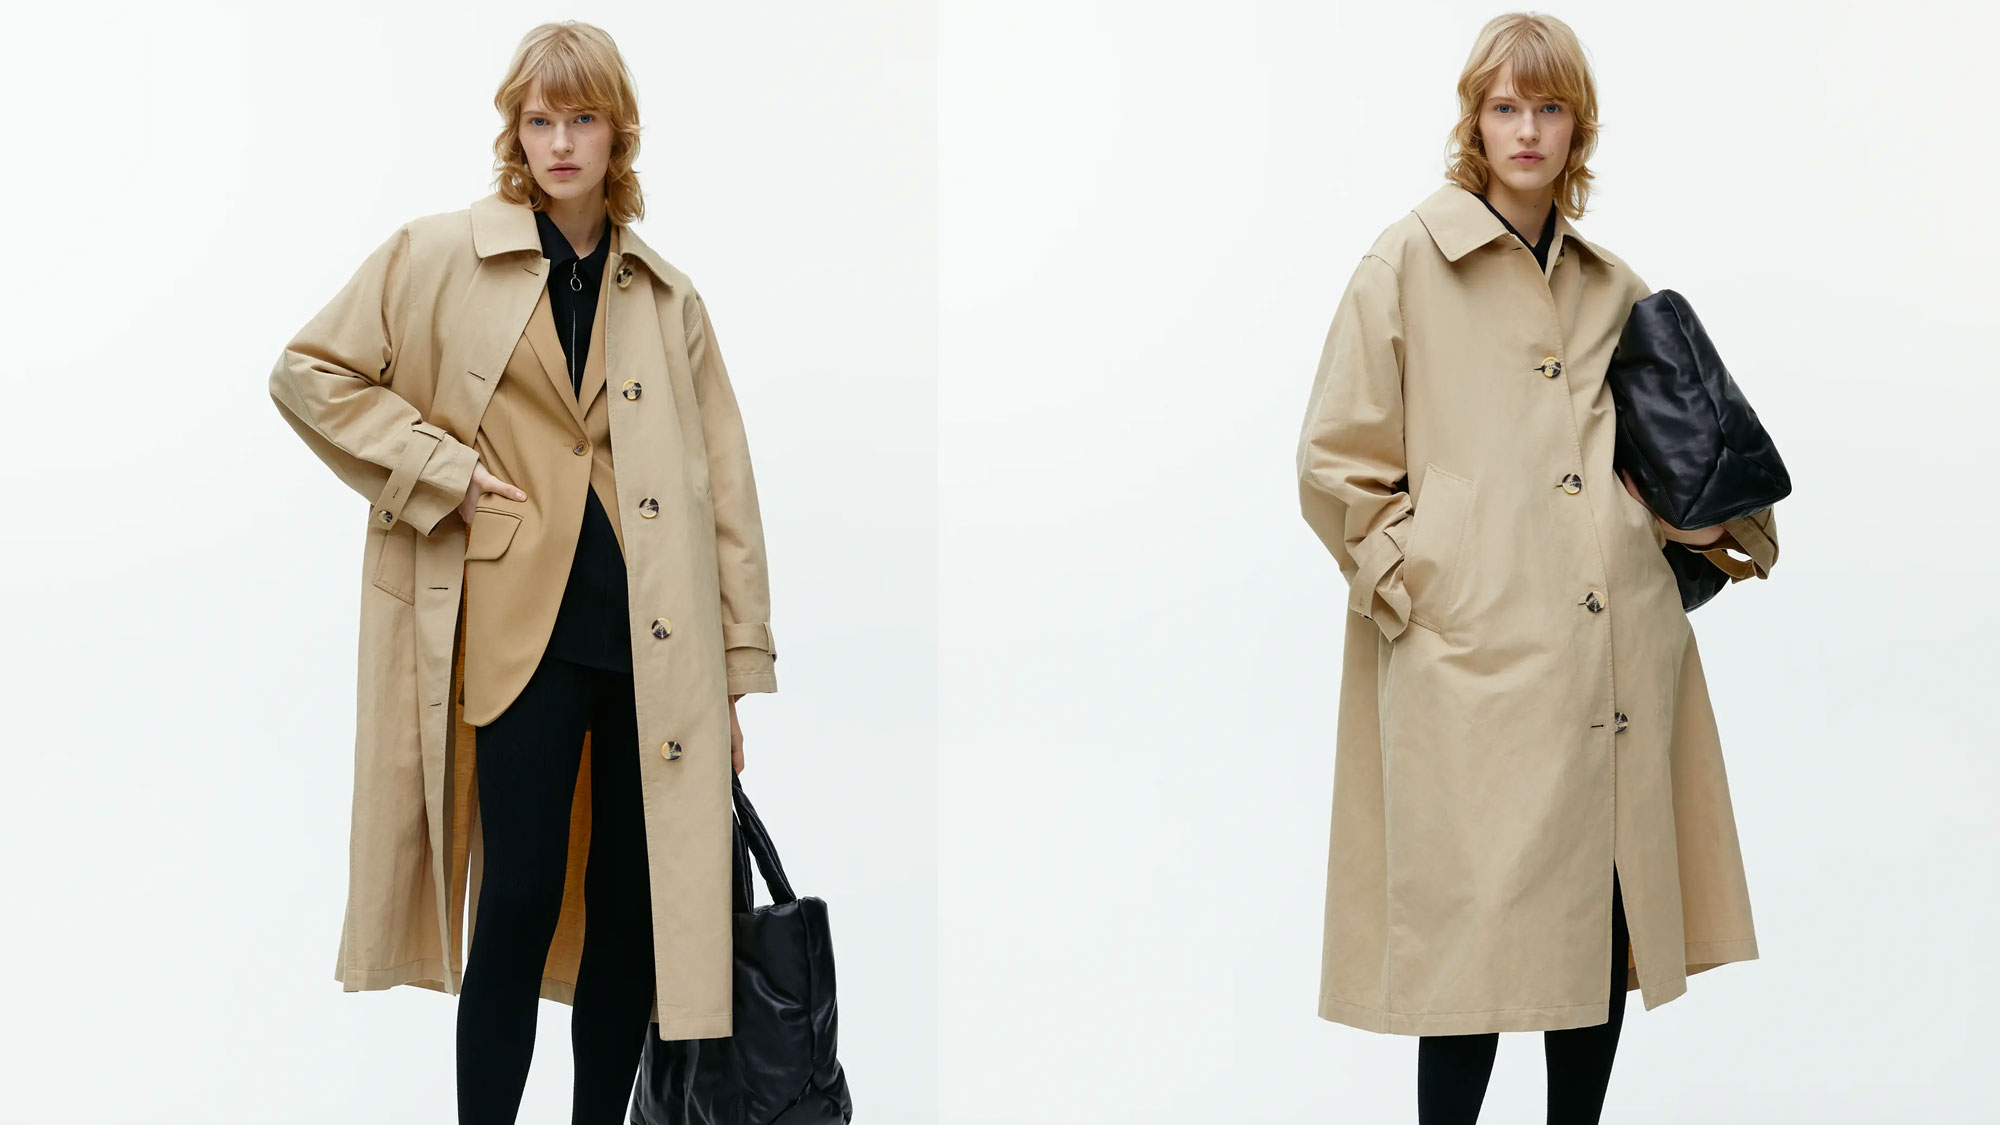 It’s only February, but I’ve found the best trench coat of 2022 at ARKET